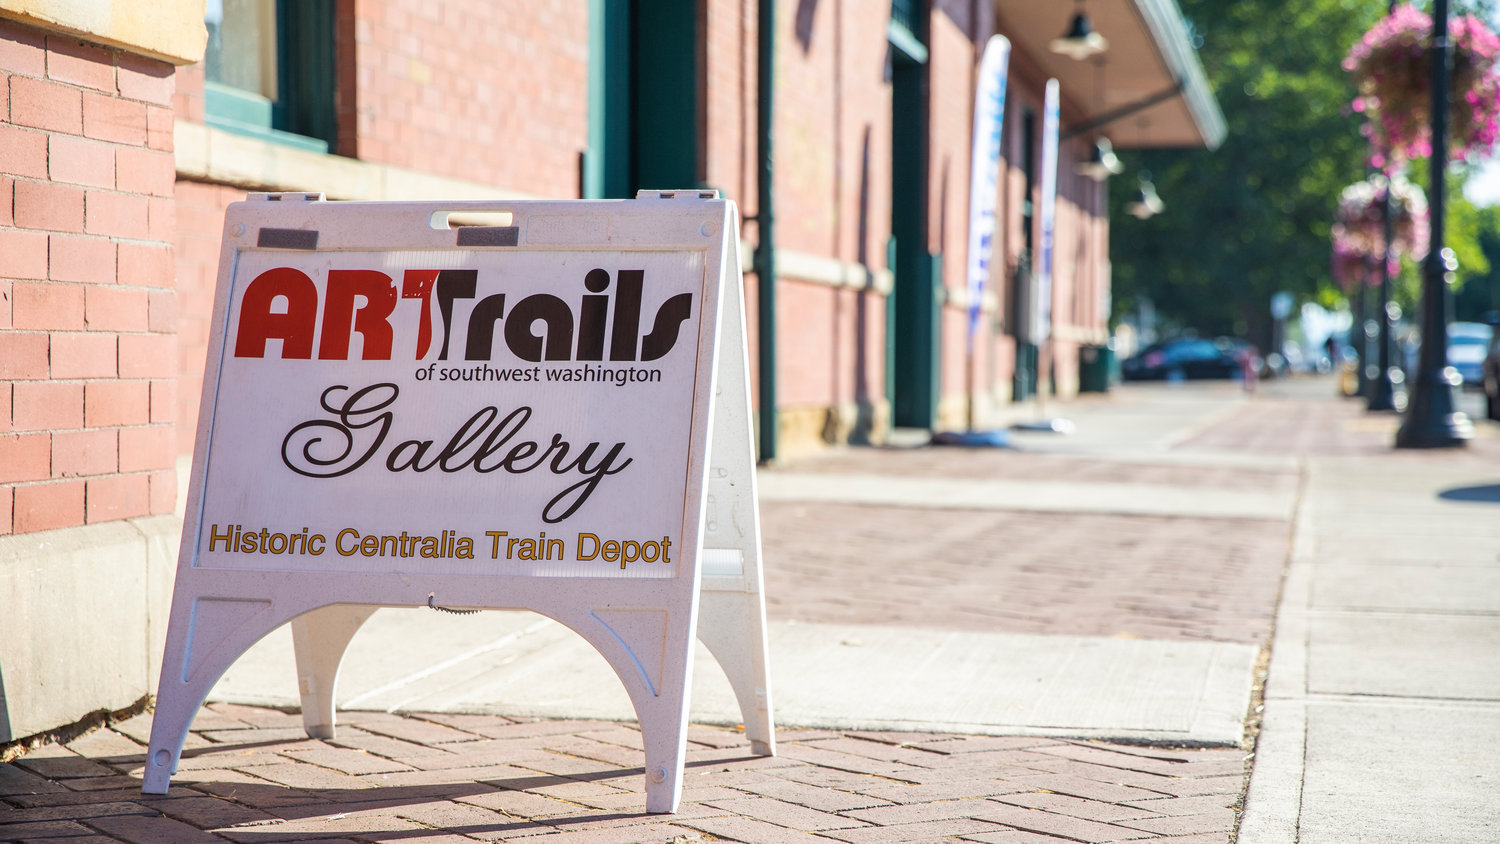 Signage for an ARTrails Gallery sits on display outside the Centralia Train Station on Tuesday.